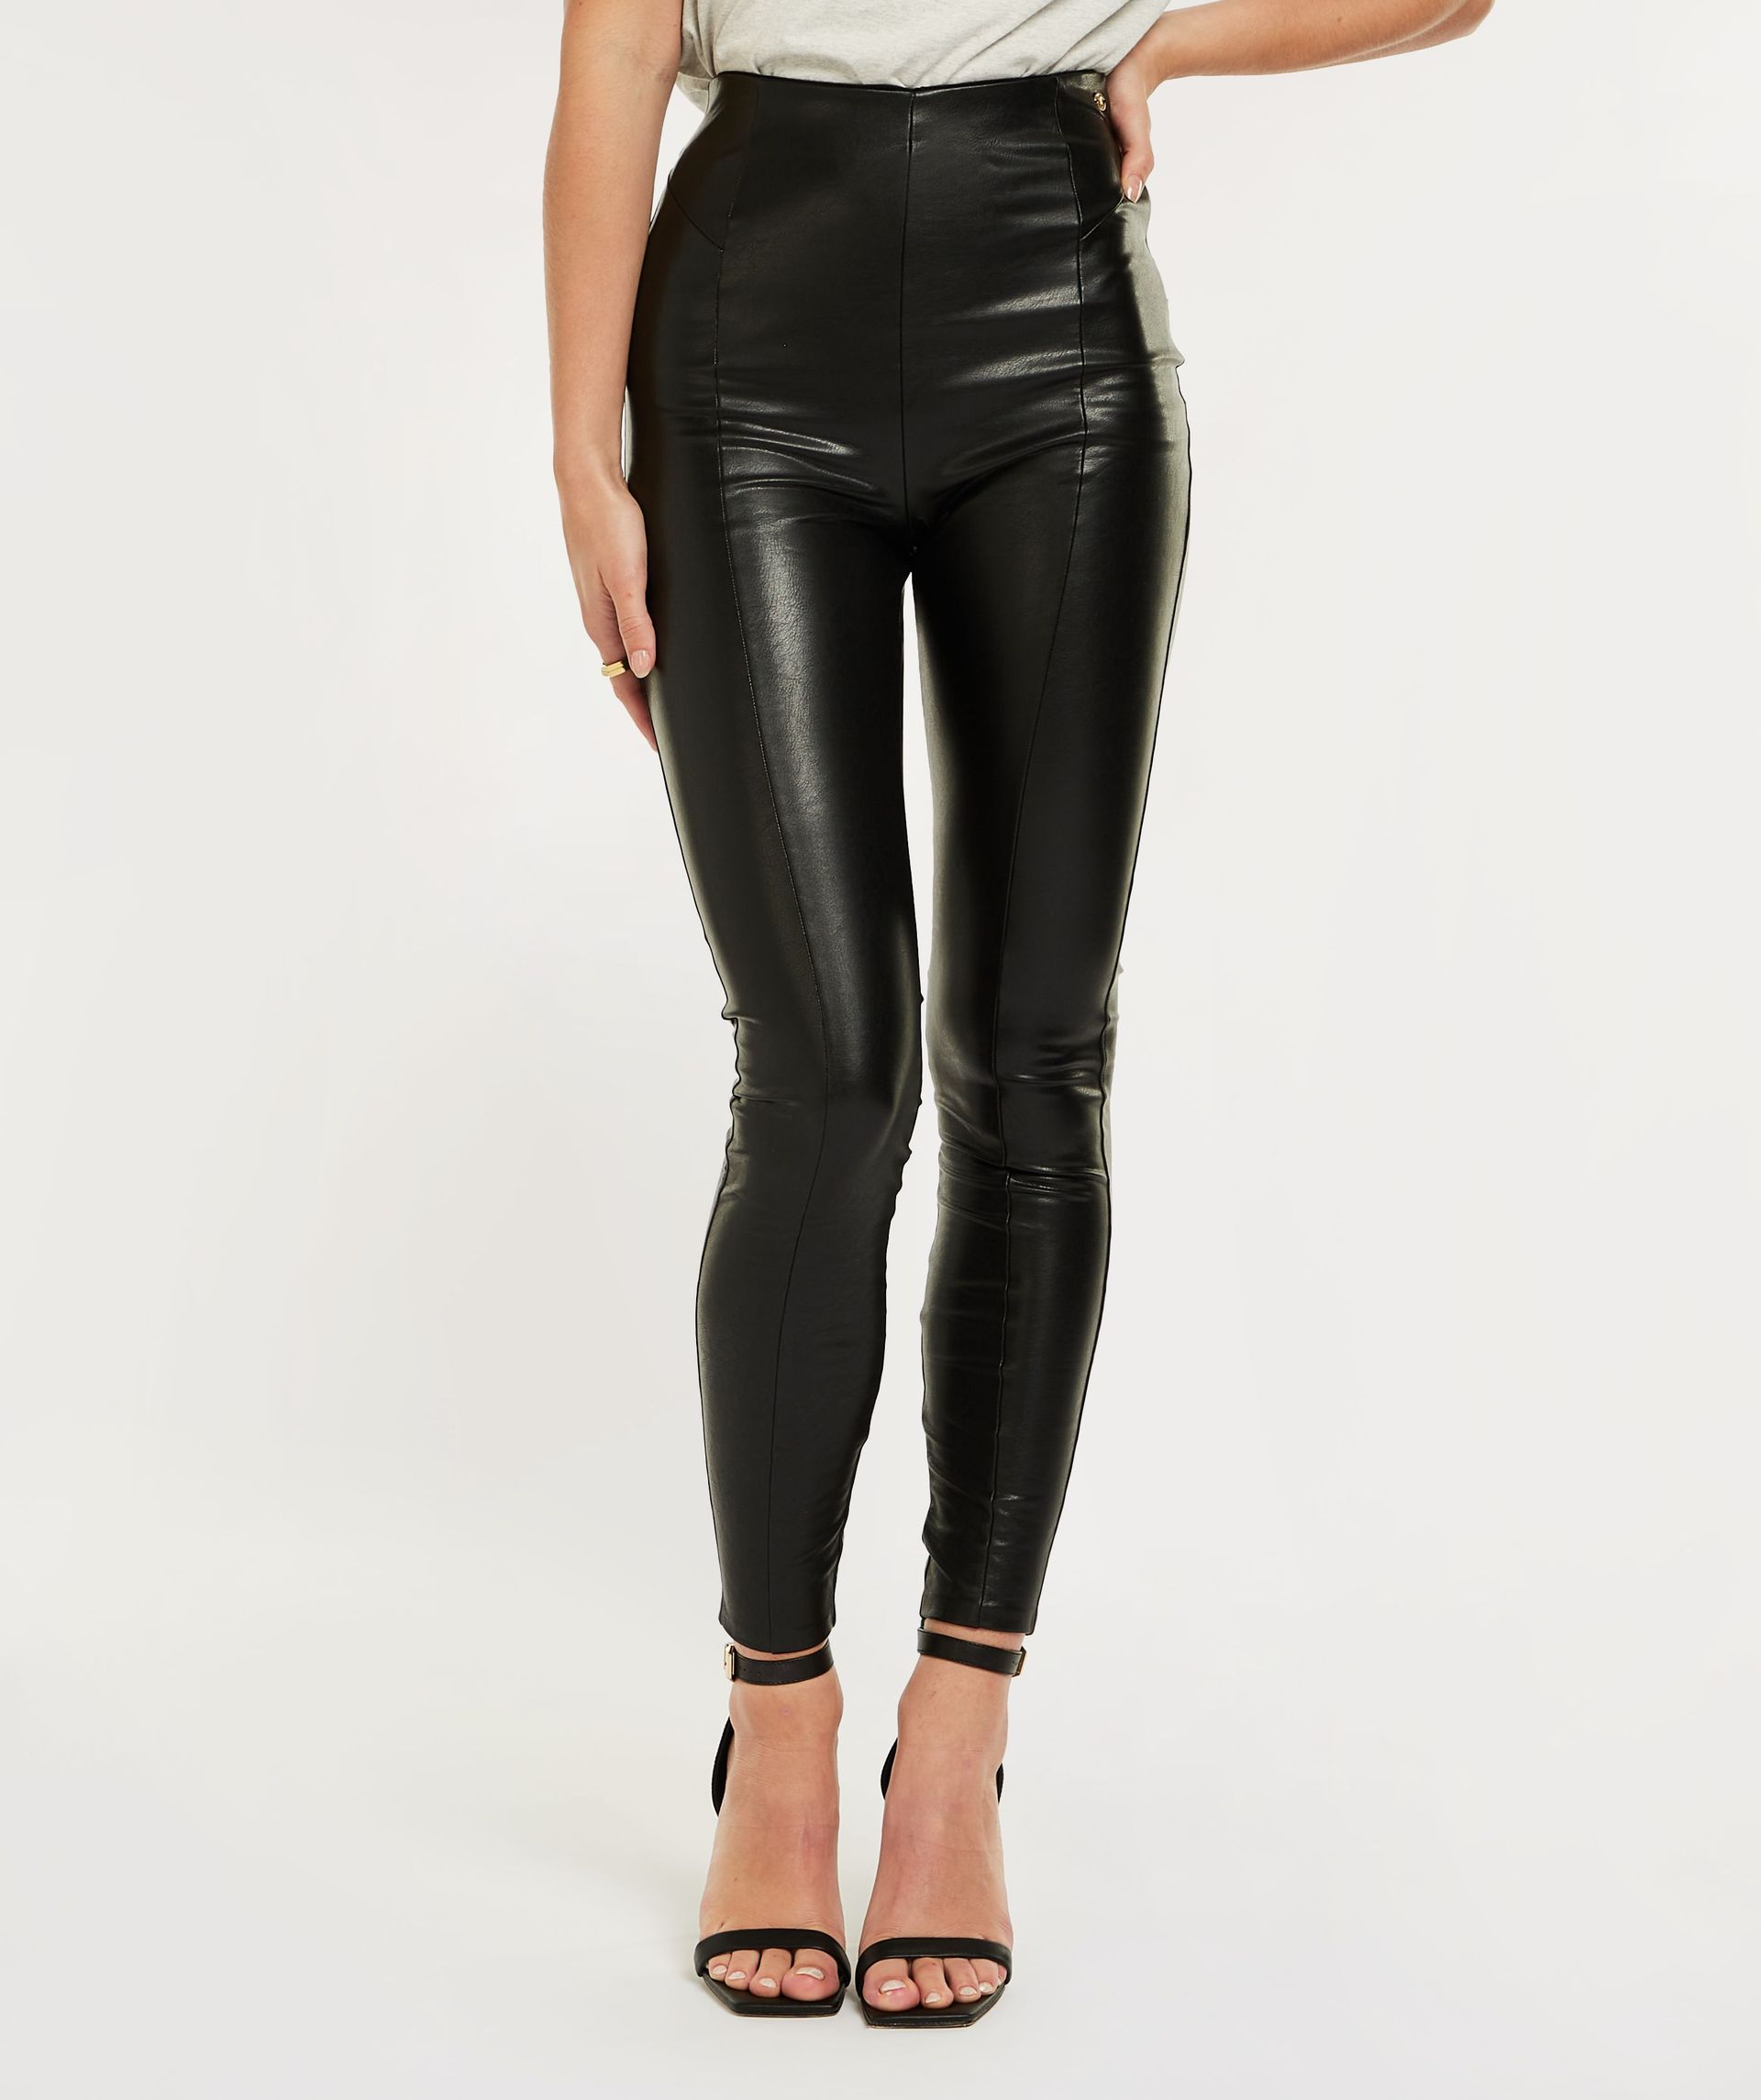 GEMMA skinny fit trousers with coating